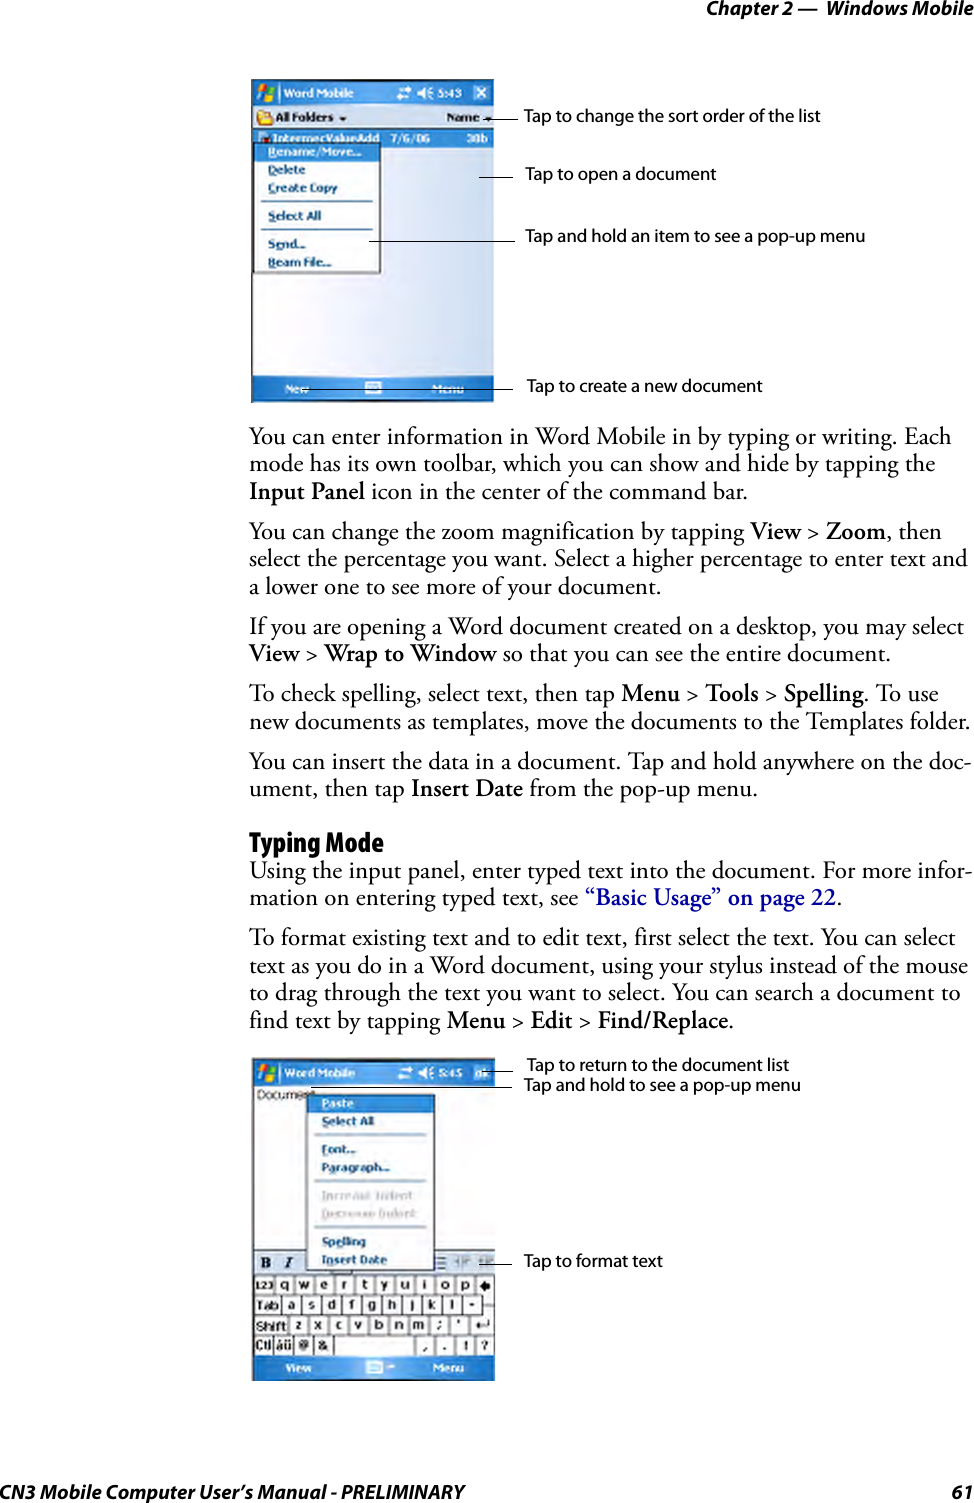 Chapter 2 —  Windows MobileCN3 Mobile Computer User’s Manual - PRELIMINARY 61You can enter information in Word Mobile in by typing or writing. Each mode has its own toolbar, which you can show and hide by tapping the Input Panel icon in the center of the command bar.You can change the zoom magnification by tapping View &gt; Zoom, then select the percentage you want. Select a higher percentage to enter text and a lower one to see more of your document.If you are opening a Word document created on a desktop, you may select View &gt; Wrap to Window so that you can see the entire document.To check spelling, select text, then tap Menu &gt; To o l s  &gt; Spelling. To use new documents as templates, move the documents to the Templates folder.You can insert the data in a document. Tap and hold anywhere on the doc-ument, then tap Insert Date from the pop-up menu.Typing ModeUsing the input panel, enter typed text into the document. For more infor-mation on entering typed text, see “Basic Usage” on page 22.To format existing text and to edit text, first select the text. You can select text as you do in a Word document, using your stylus instead of the mouse to drag through the text you want to select. You can search a document to find text by tapping Menu &gt; Edit &gt; Find/Replace.Tap to change the sort order of the listTap to open a documentTap and hold an item to see a pop-up menuTap to create a new documentTap and hold to see a pop-up menuTap to return to the document listTap to format text